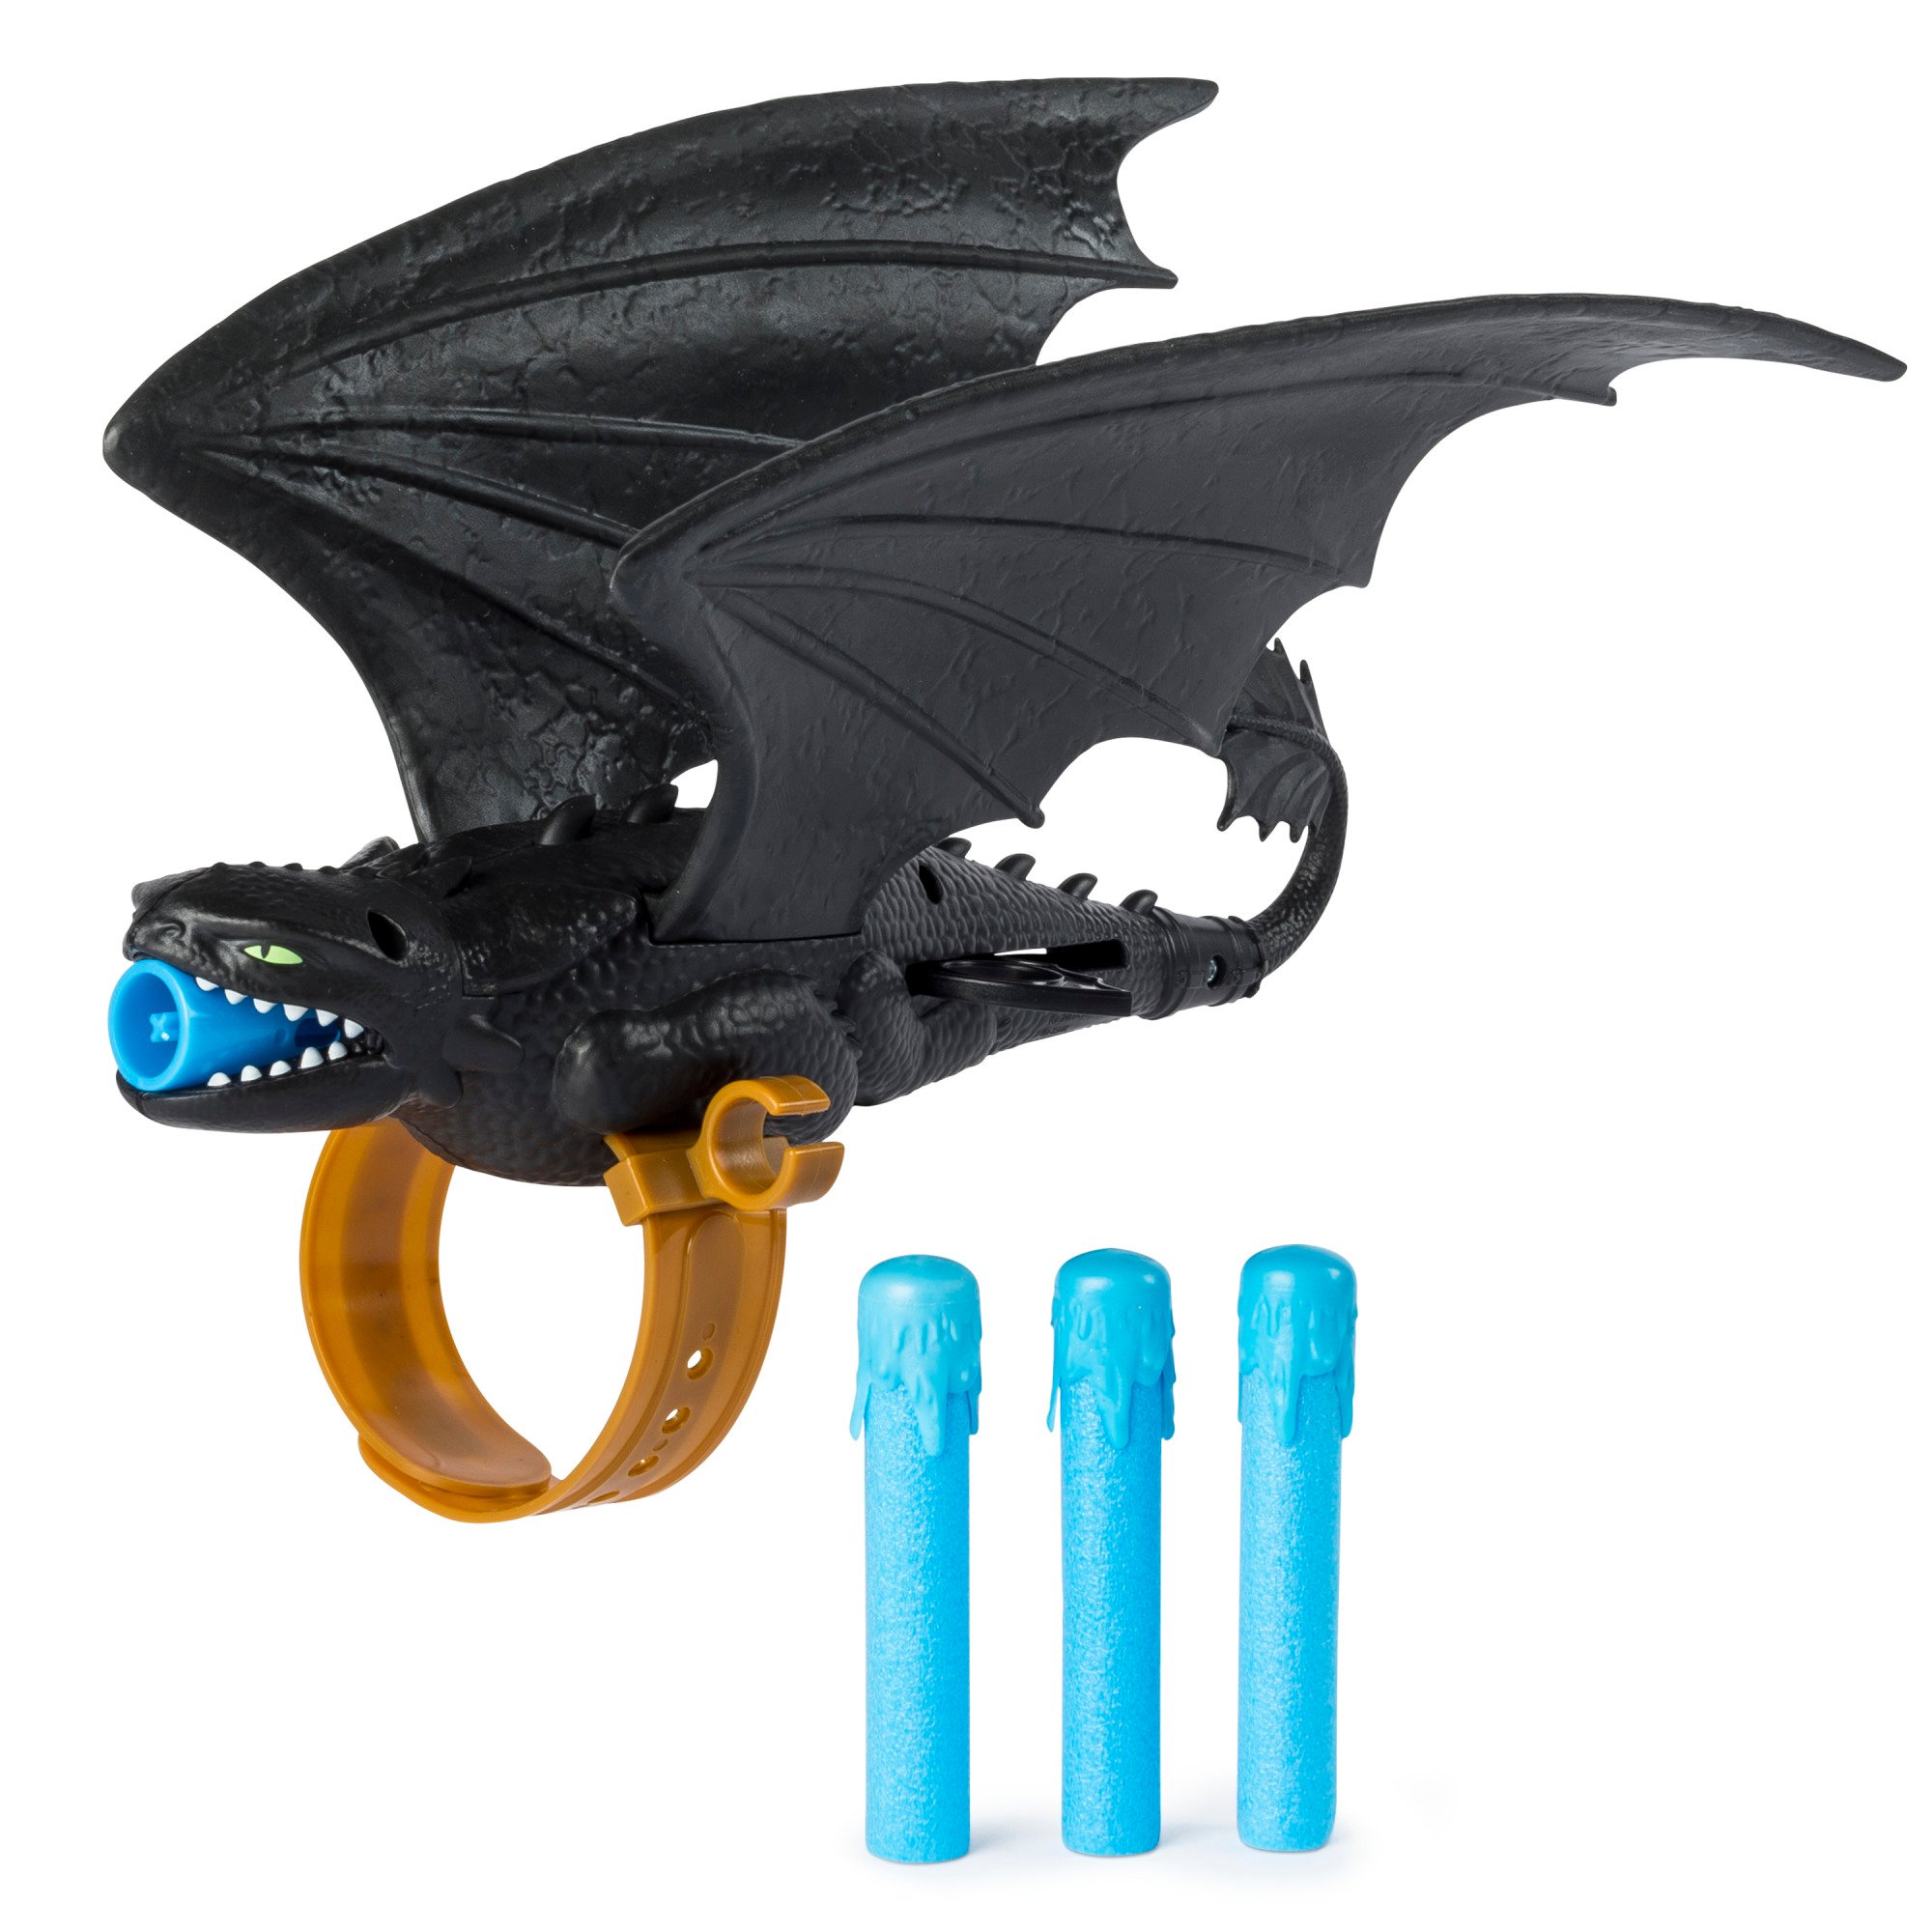 How To Train Your Dragon - Wrist Launcher - Toothless (6045115T)